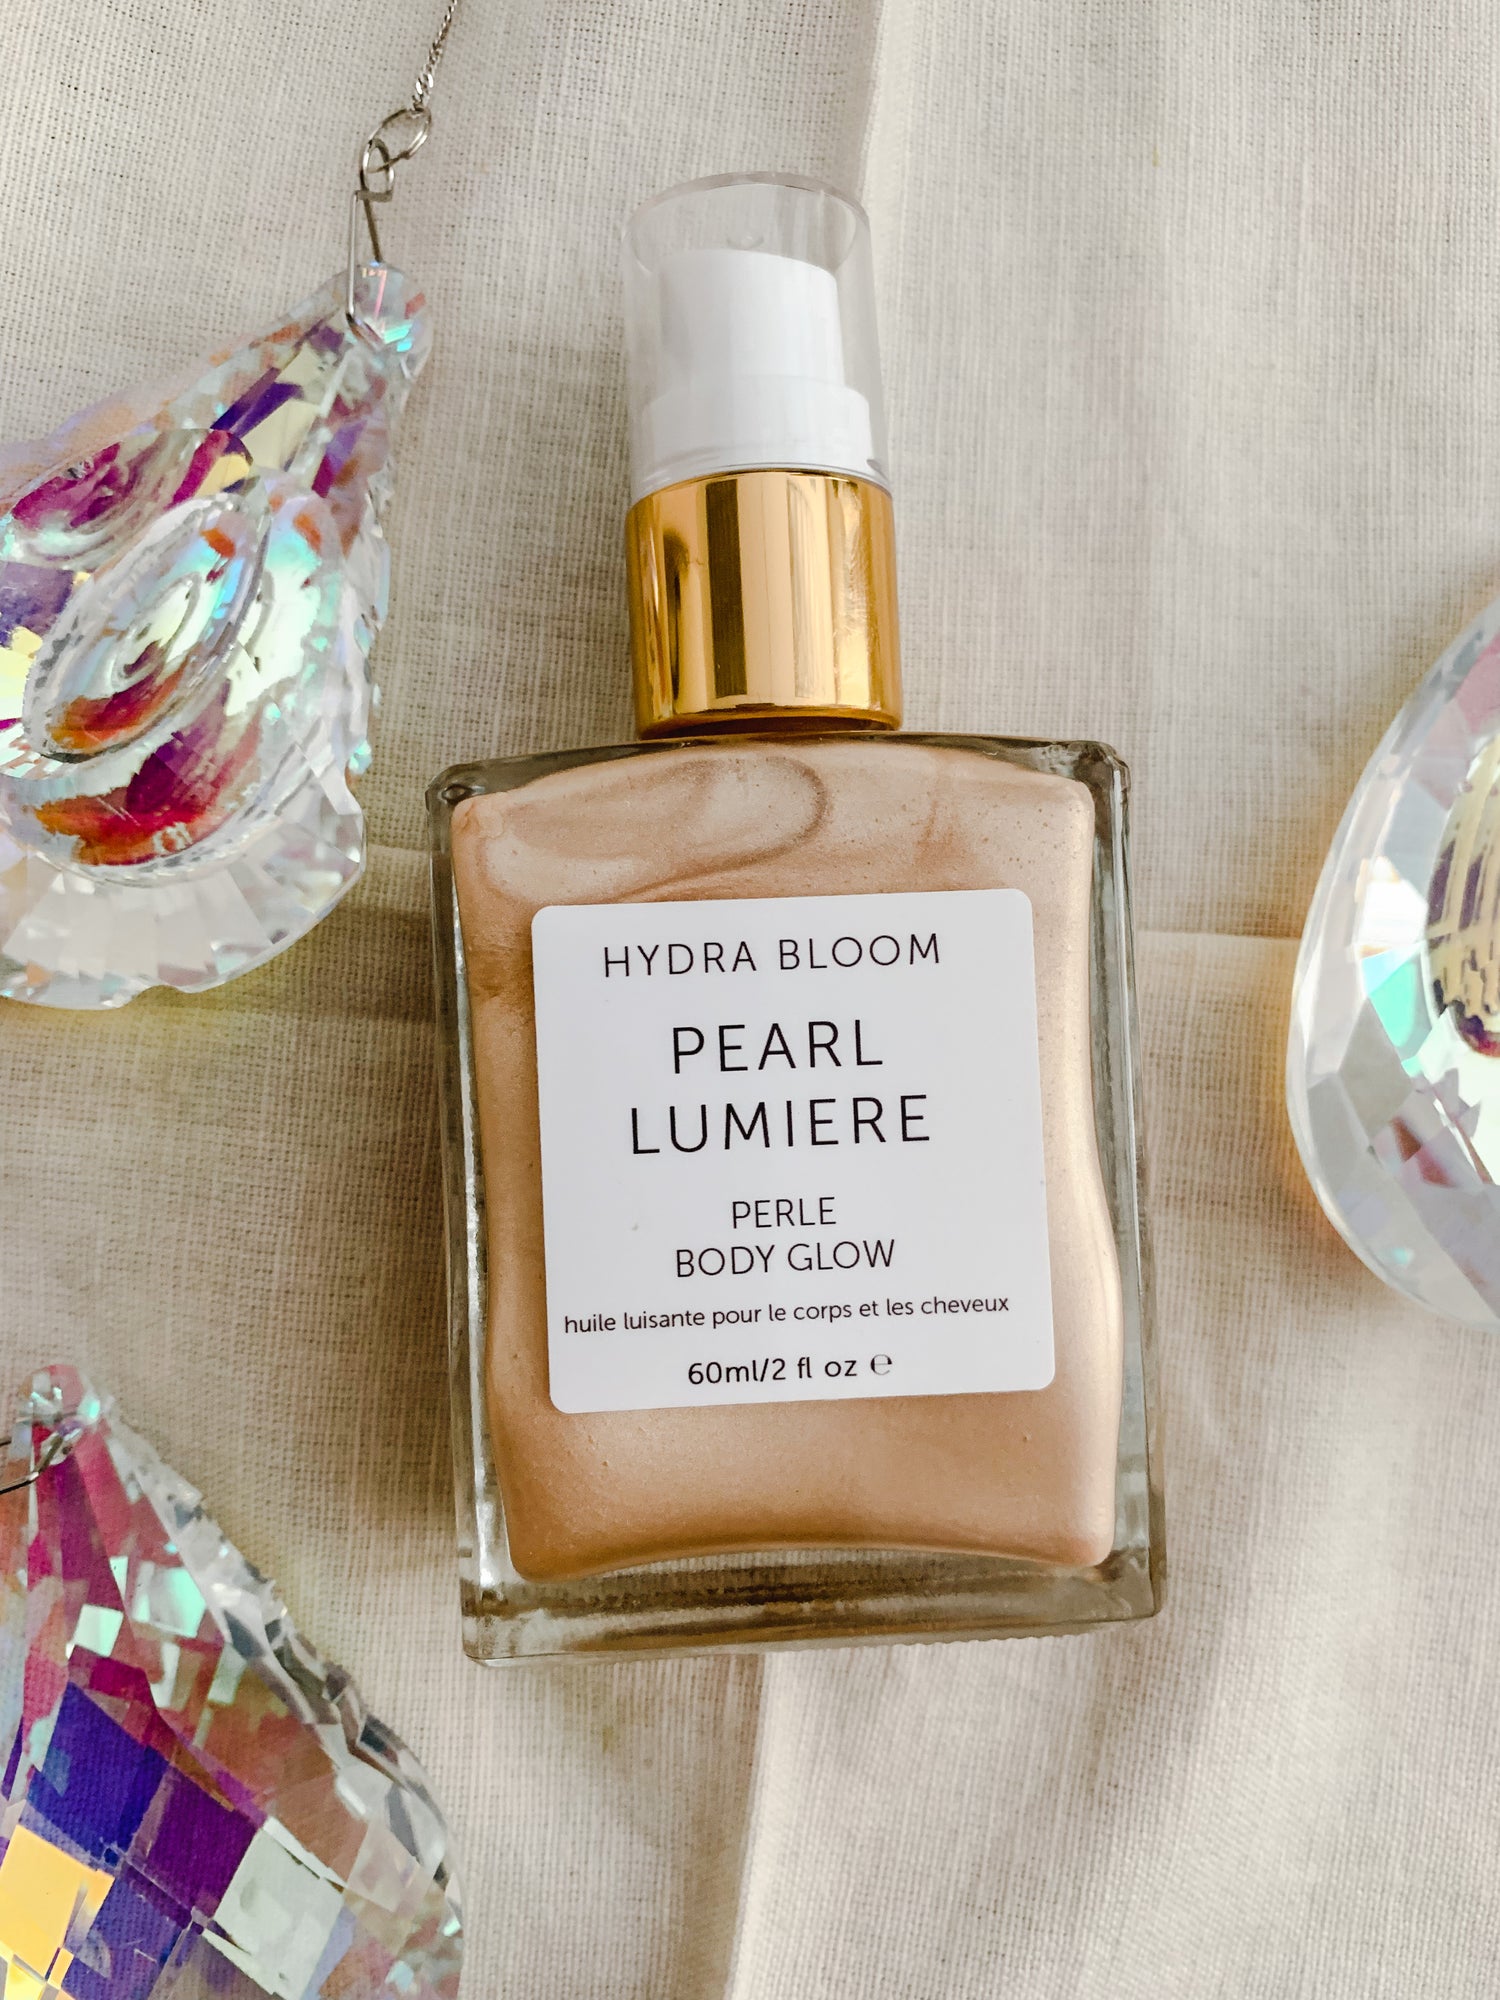 French Girl Lumiere Bronze Shimmer Oil